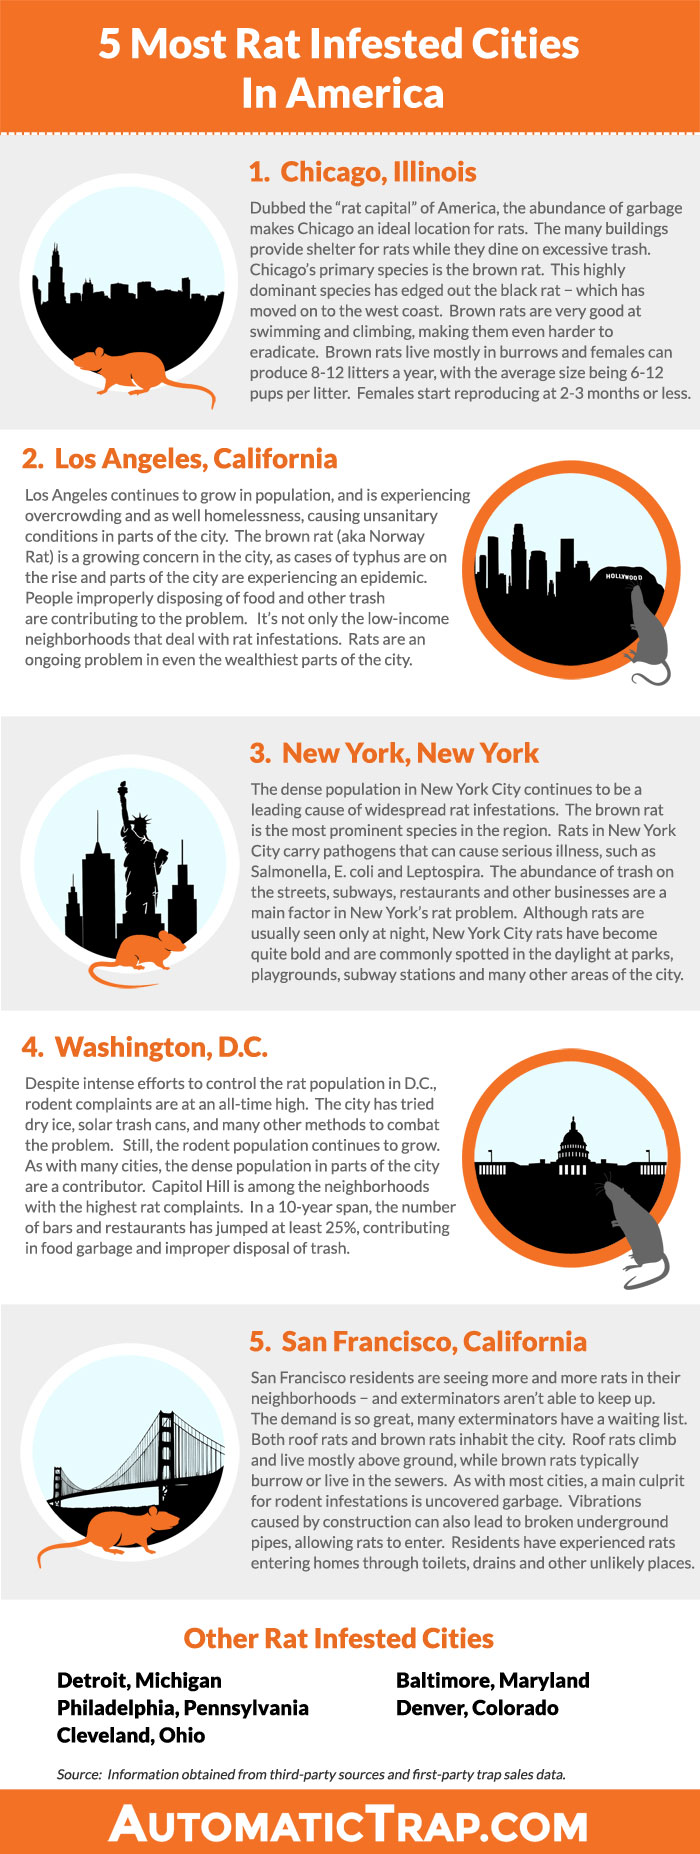 Rat Infested Cities - Infographic